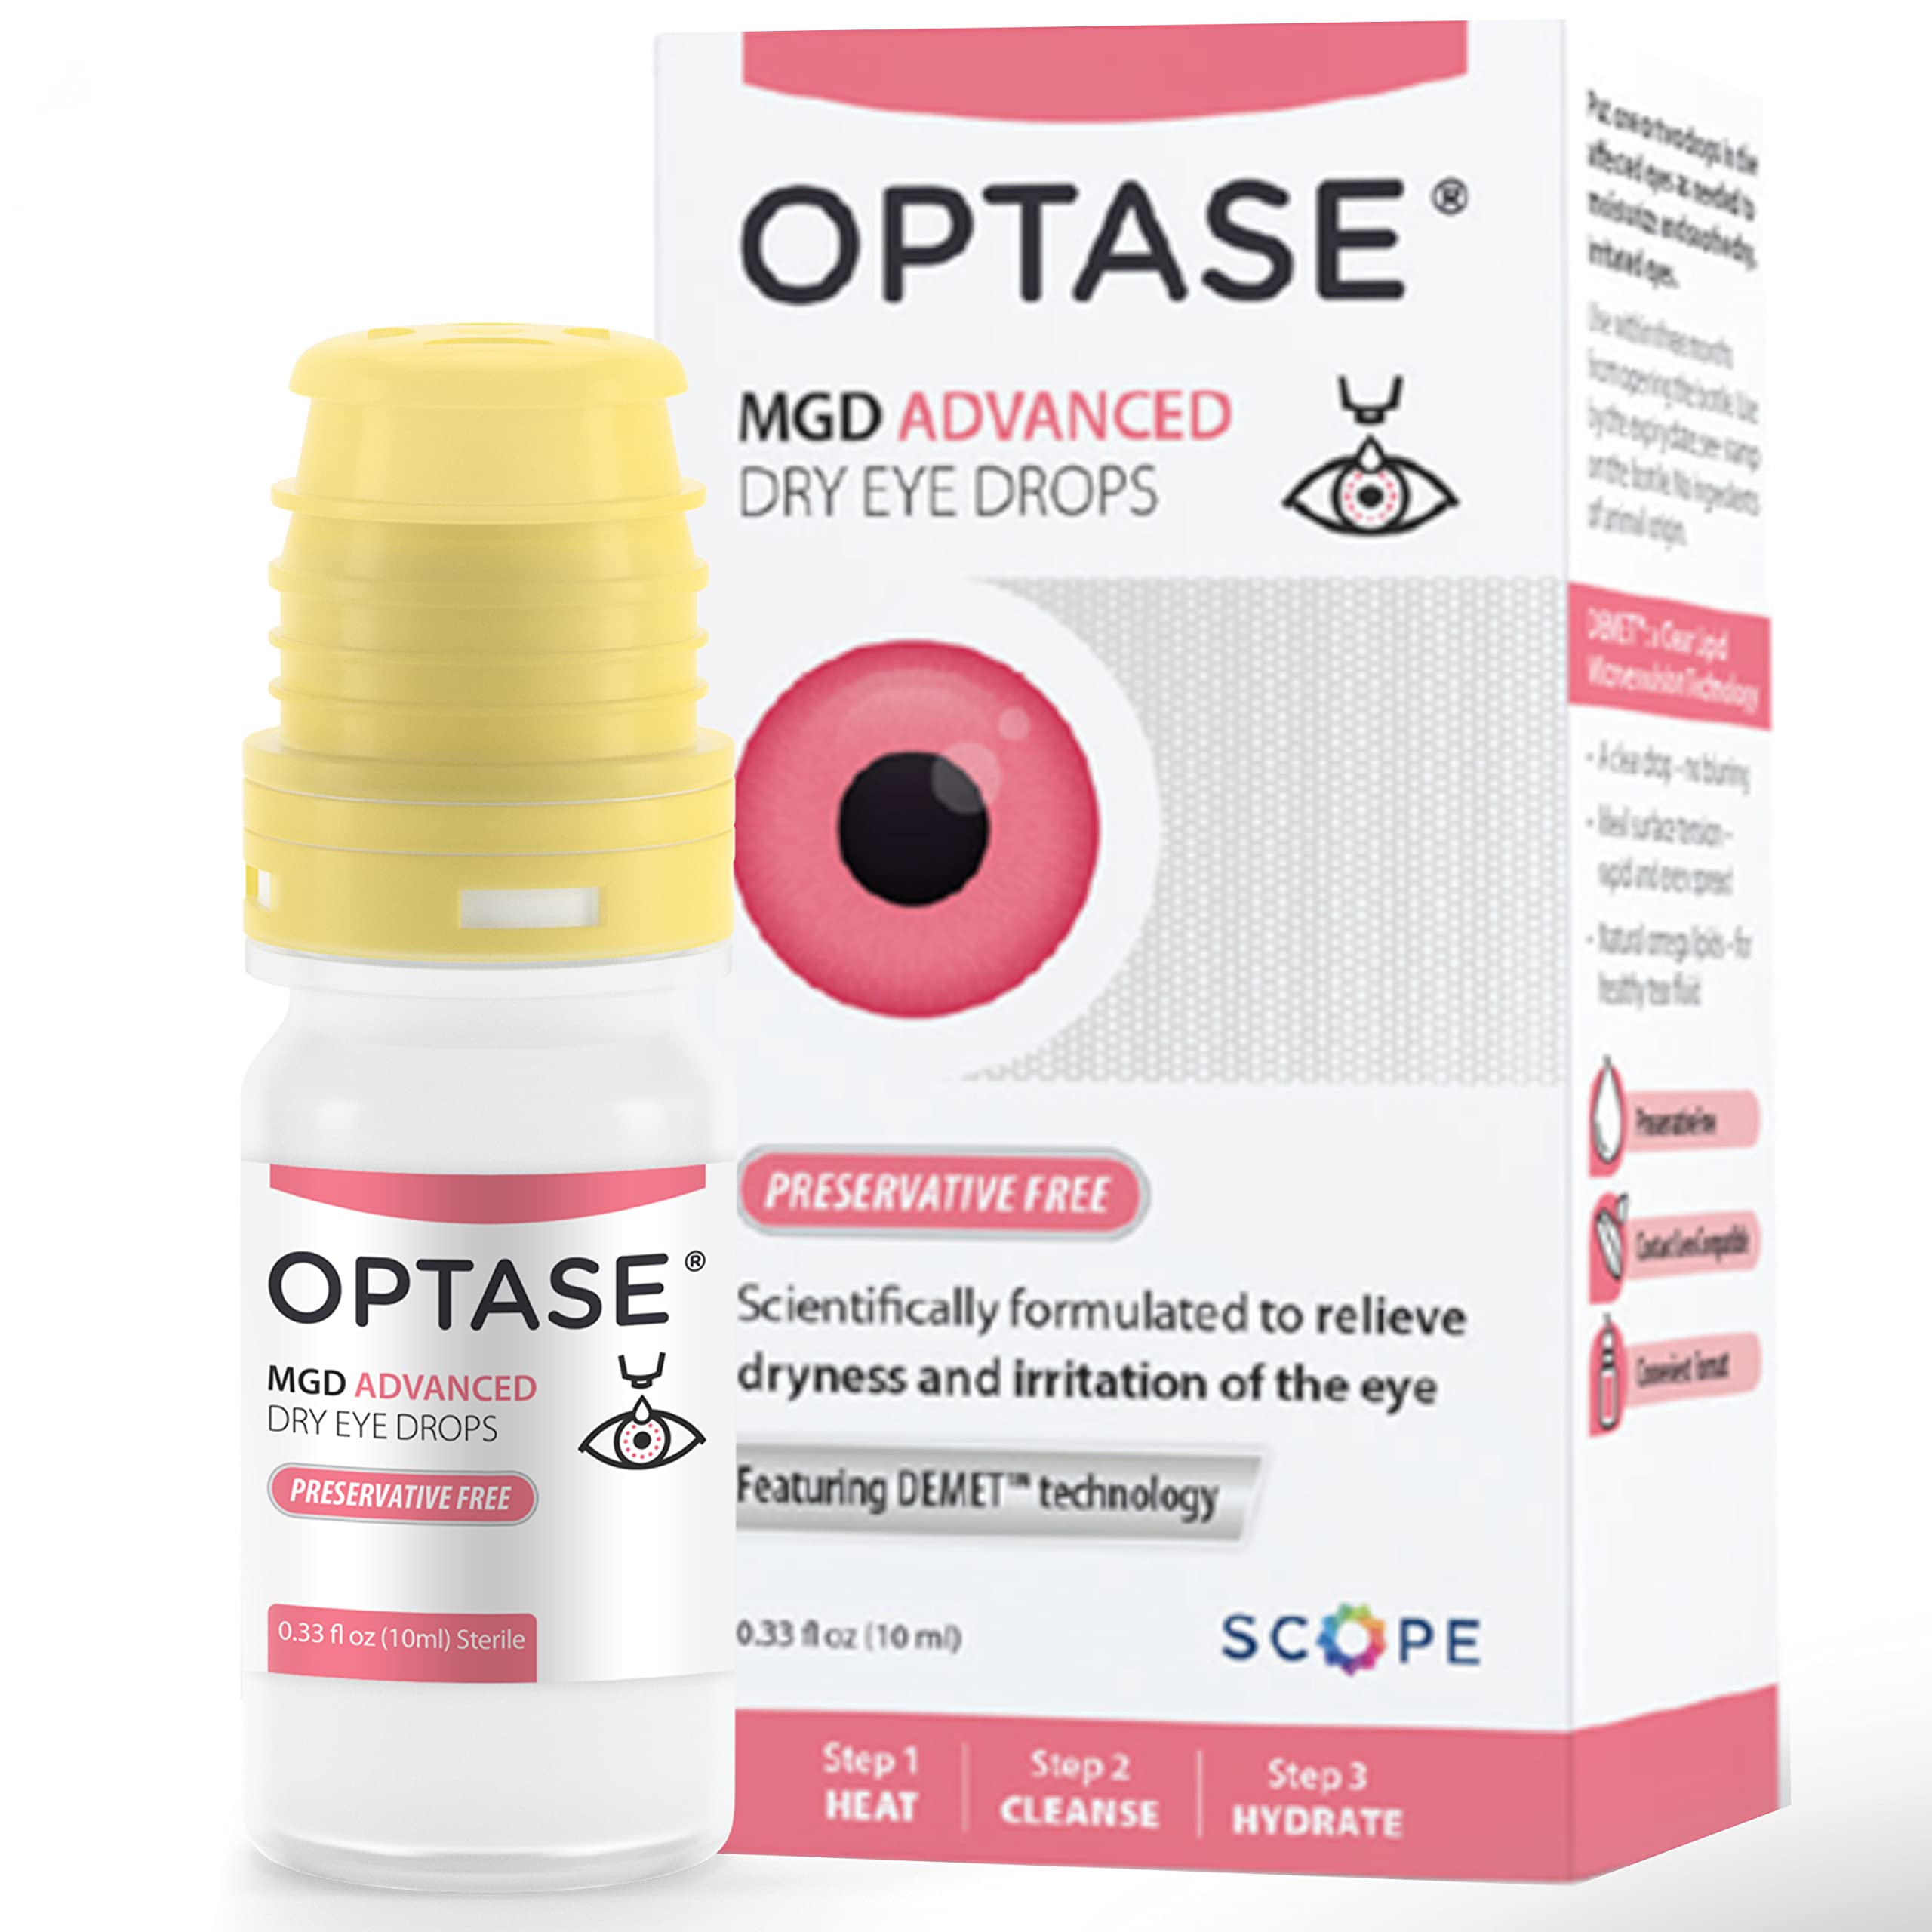 Optase MgD Advanced Dry Eye Drops - Preservative Free Eye Drops for Dry Eyes and MgD - Artificial Tears for MgD Symptoms - Demet